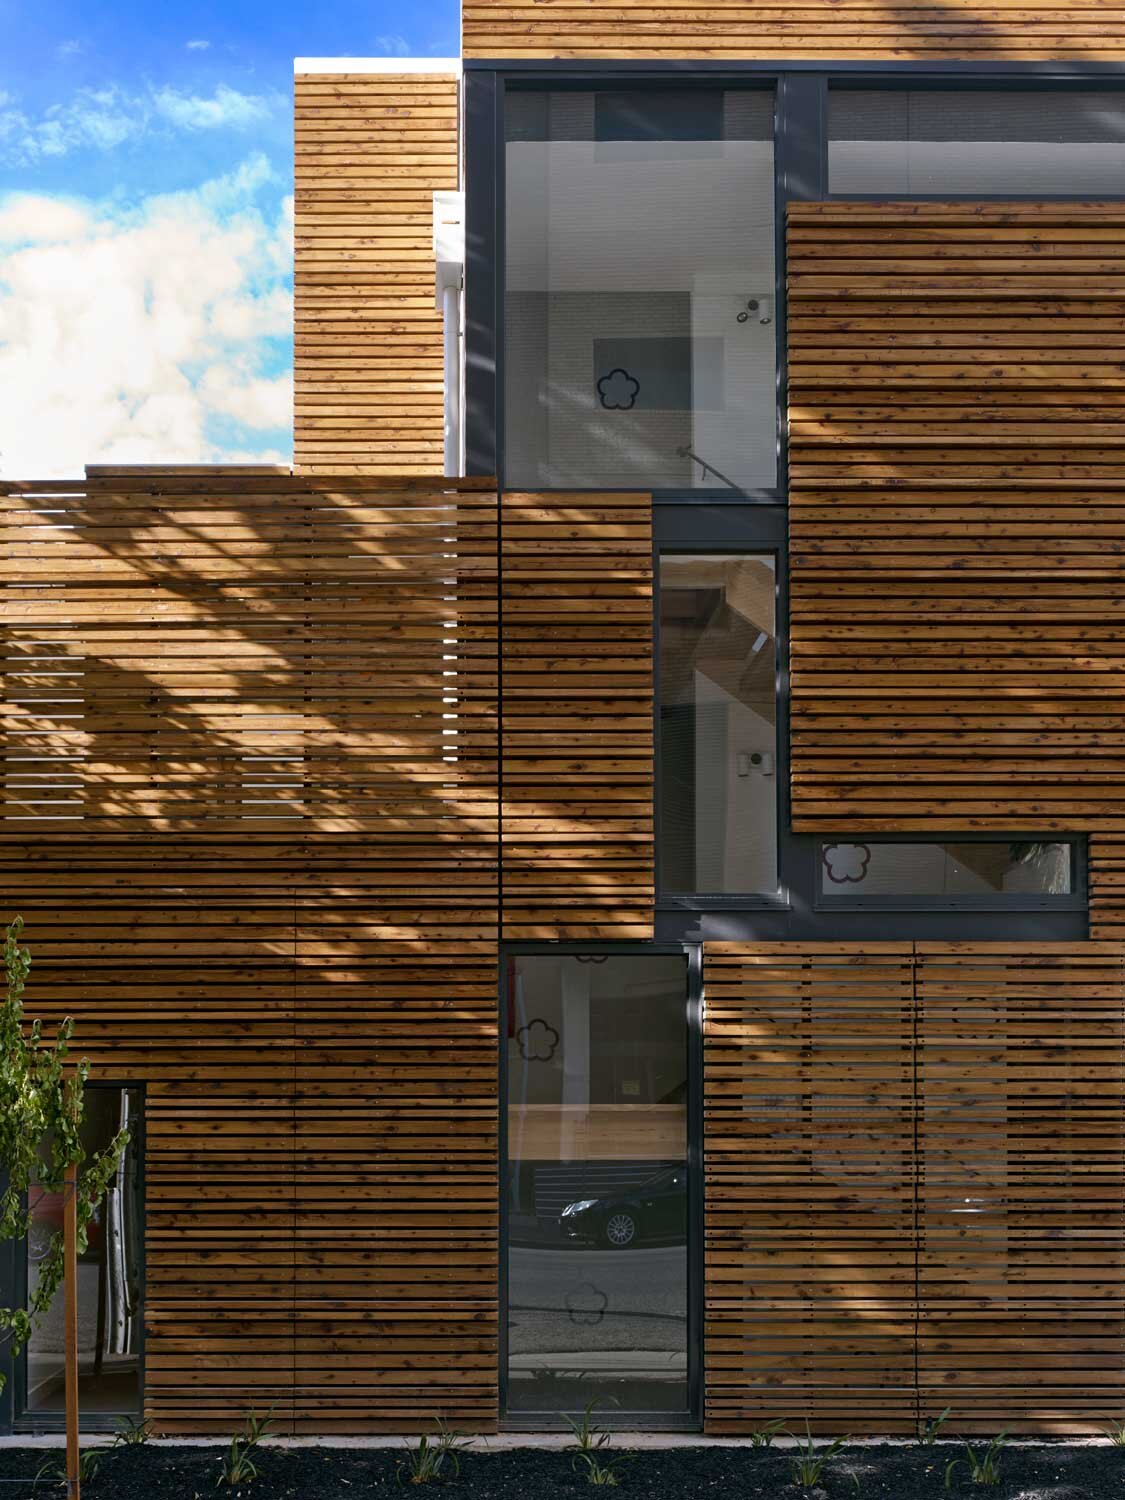 peel-street-apartments-melbourne-by-warc-studio-architects07.jpg